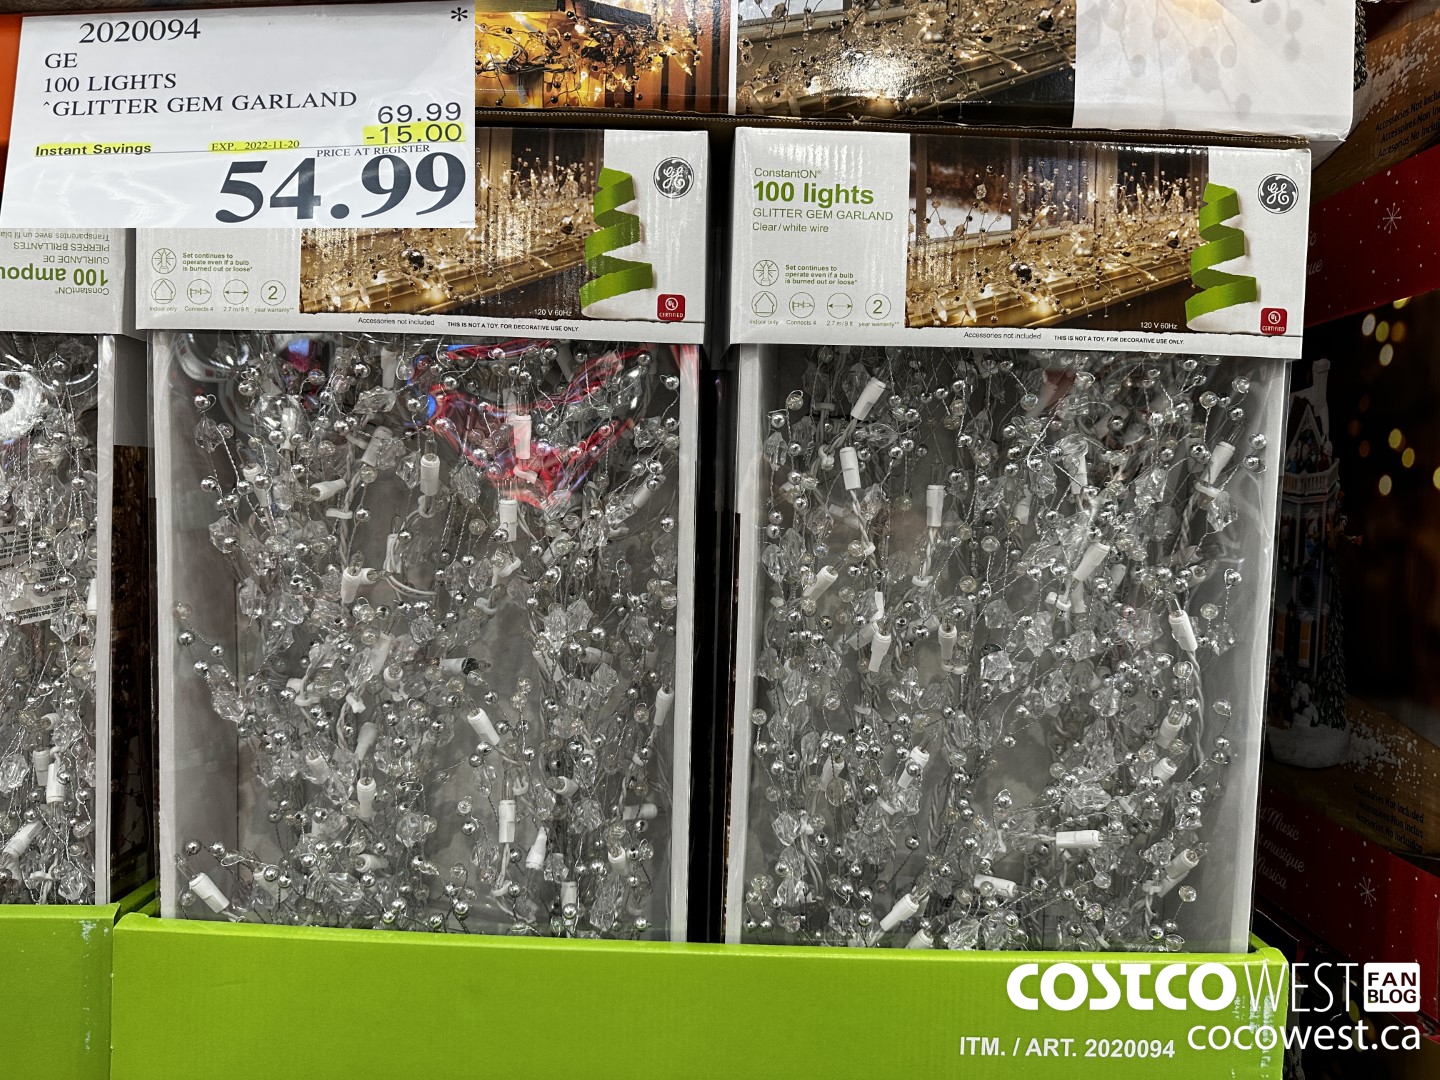 Weekend Update! – Costco Sale Items for Nov 18-20, 2022 for BC, AB, MB, SK  - Costco West Fan Blog